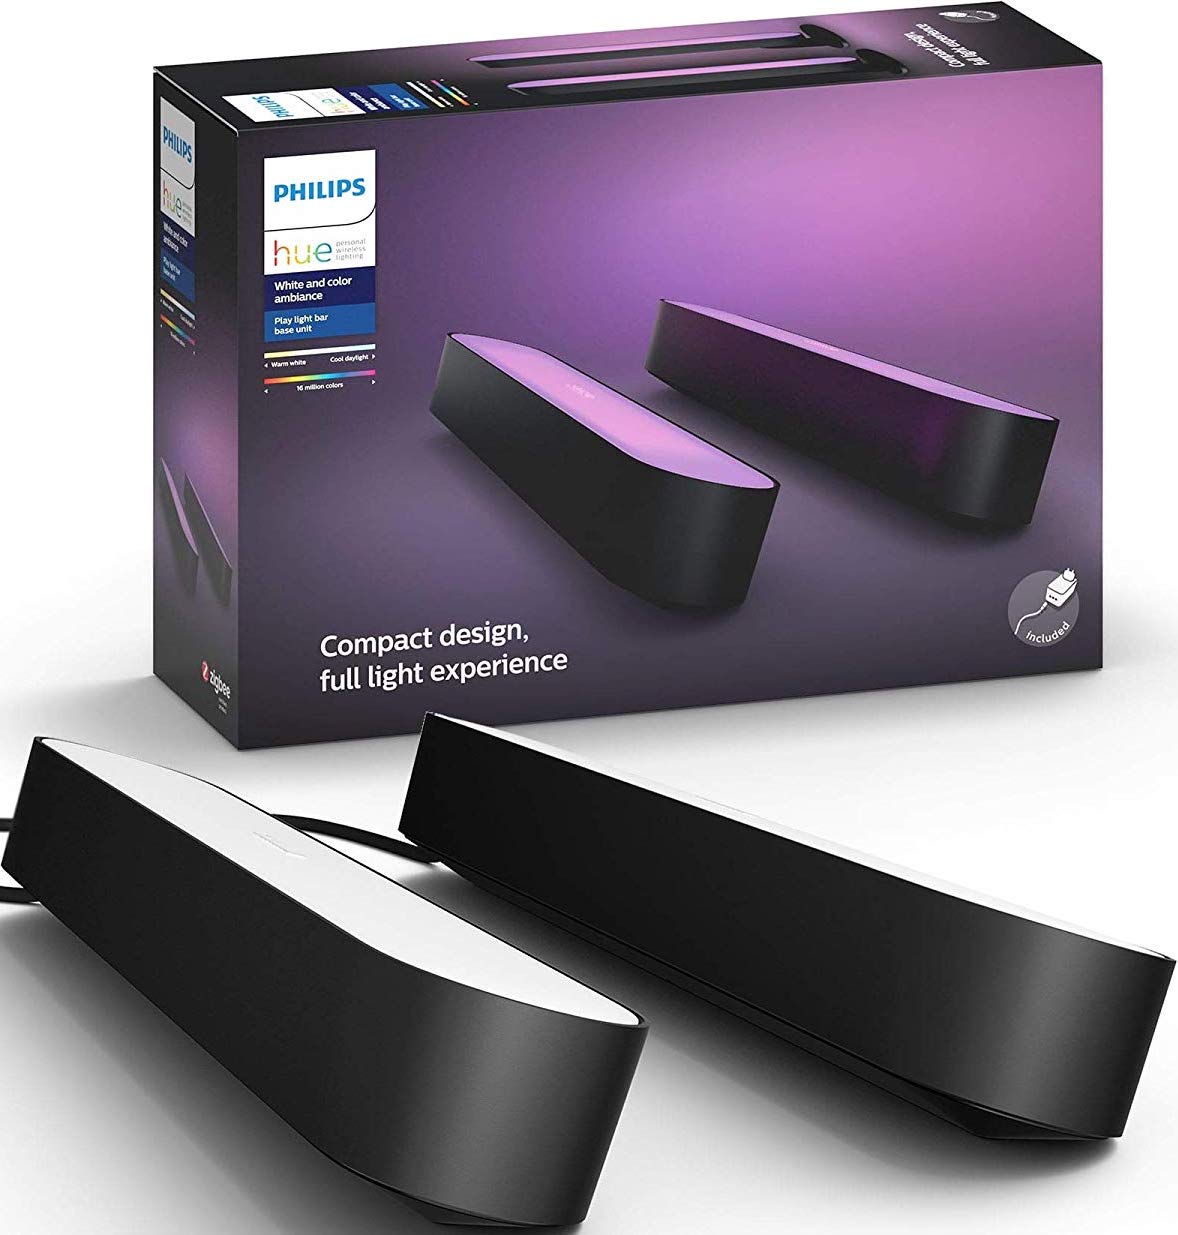 Philips Hue Play Bar in black next to product packaging